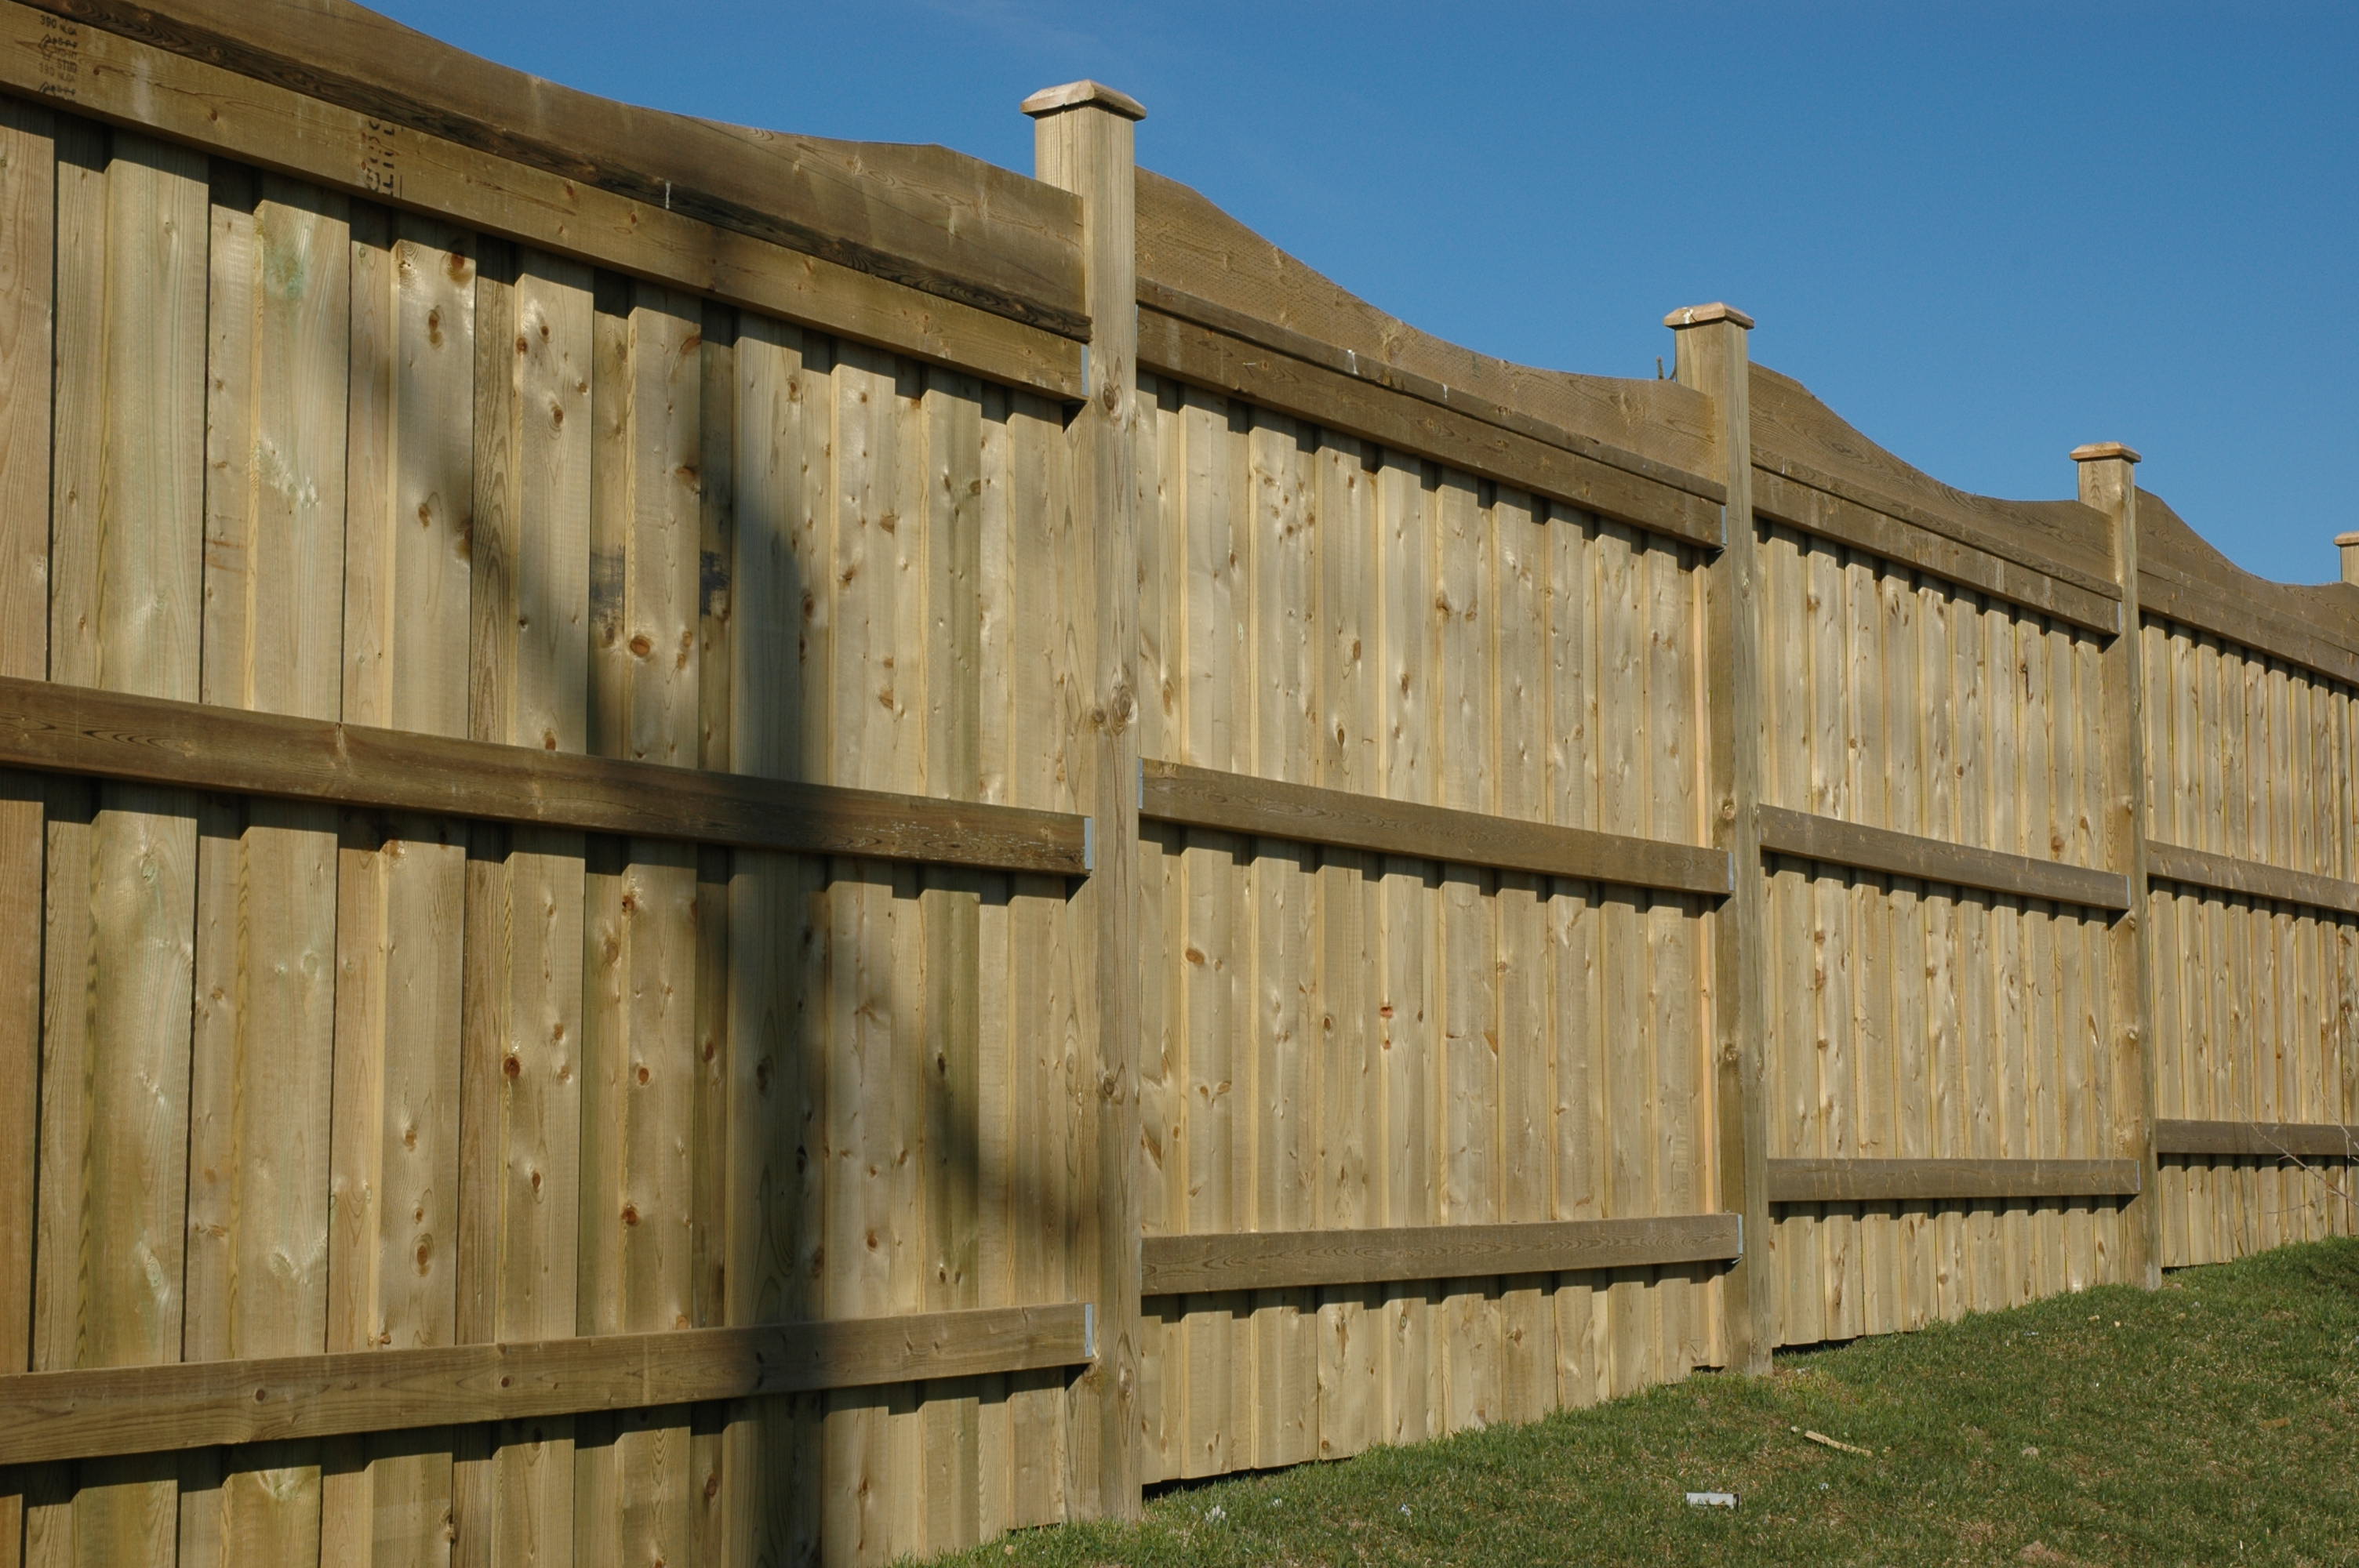 Wooden Privacy Fences Pictures